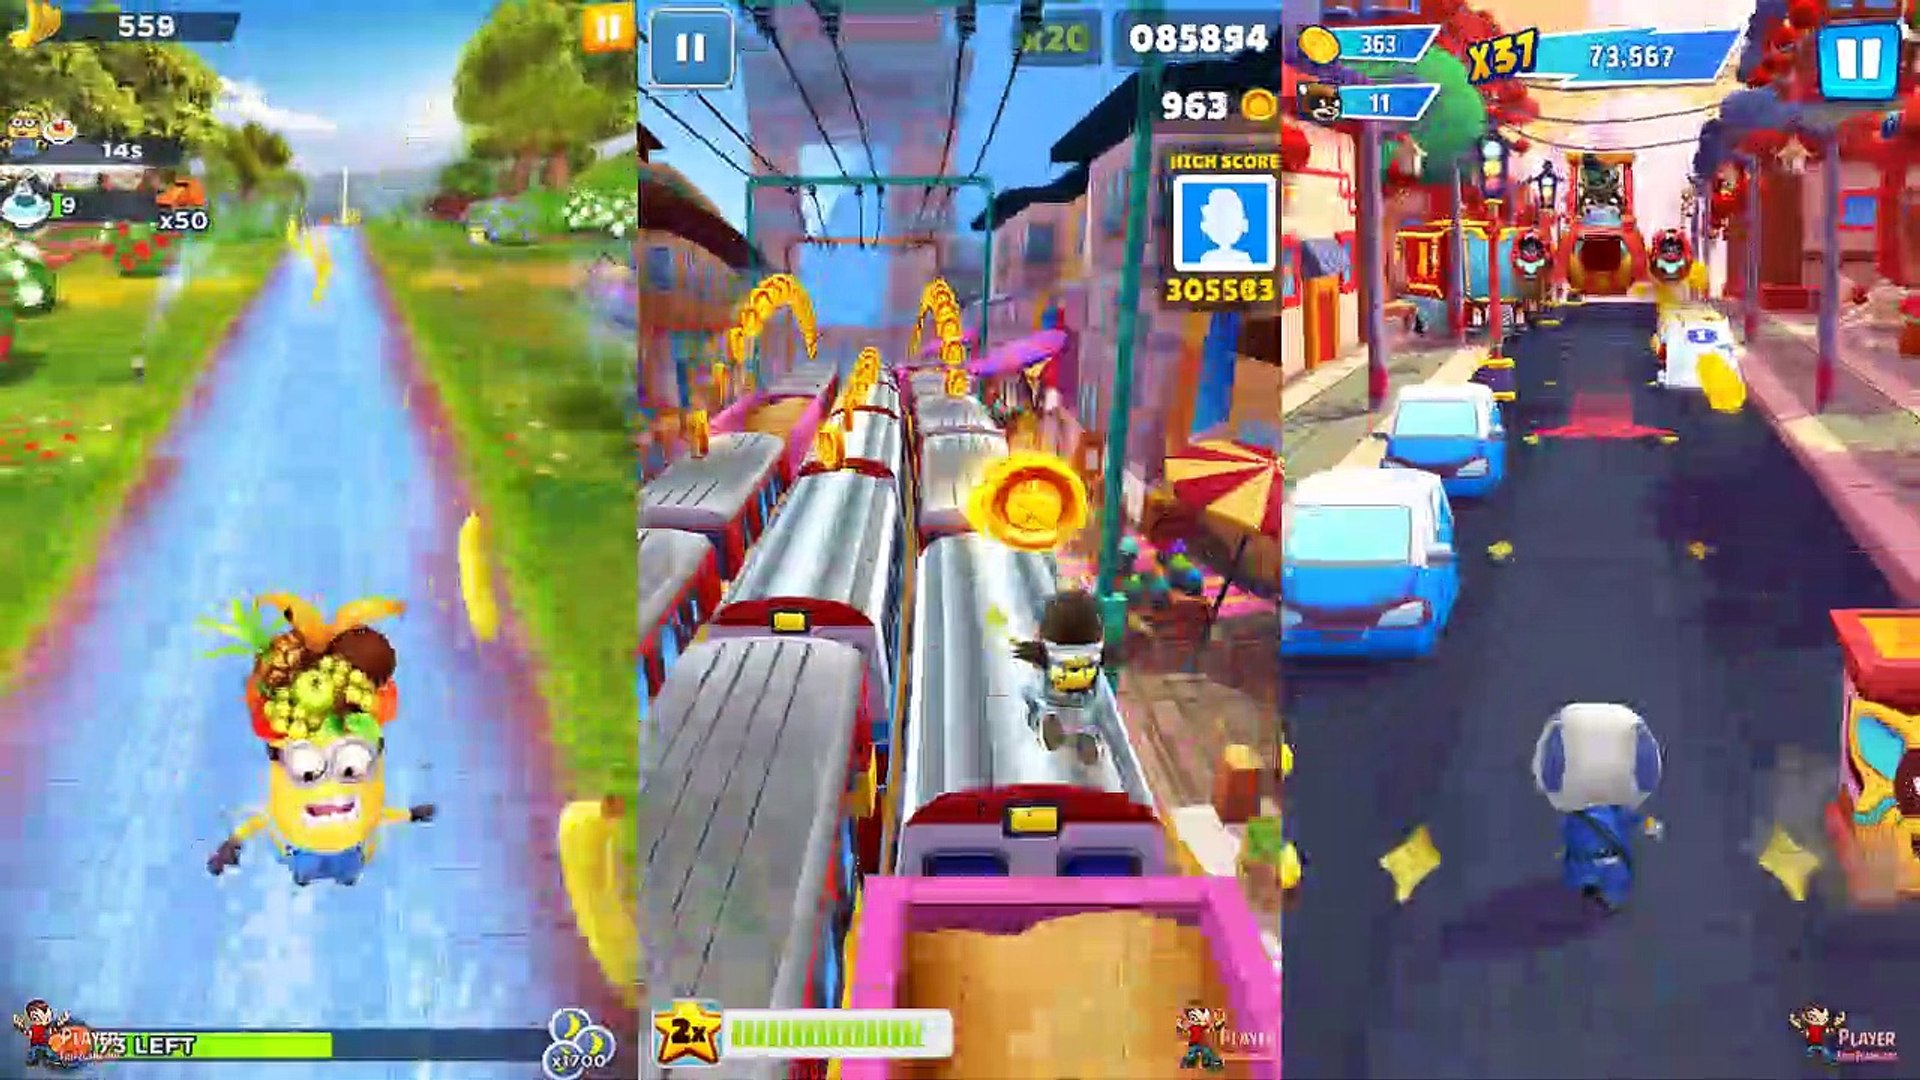 Subway Surfers Dashes to Iceland in Latest Update